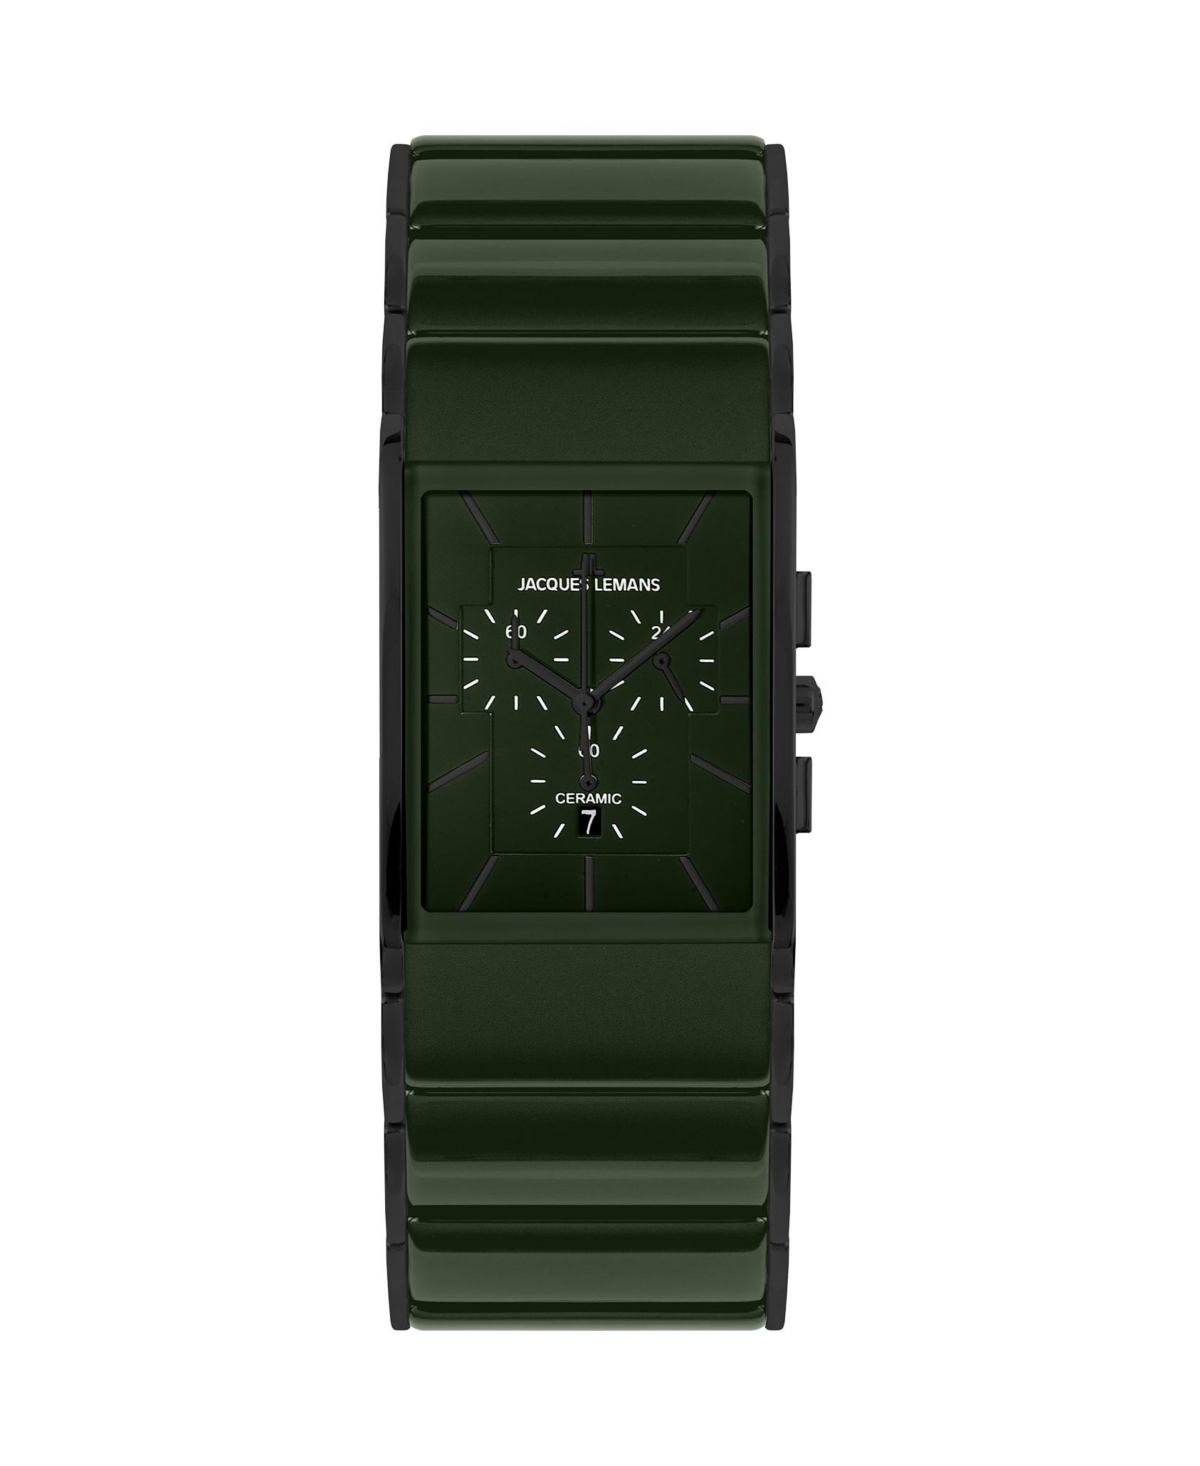 Men's Dublin Watch with High-Tech Ceramic Strap, Solid Stainless Steel Ip-Black, Chronograph, 1-1941 - Dark green